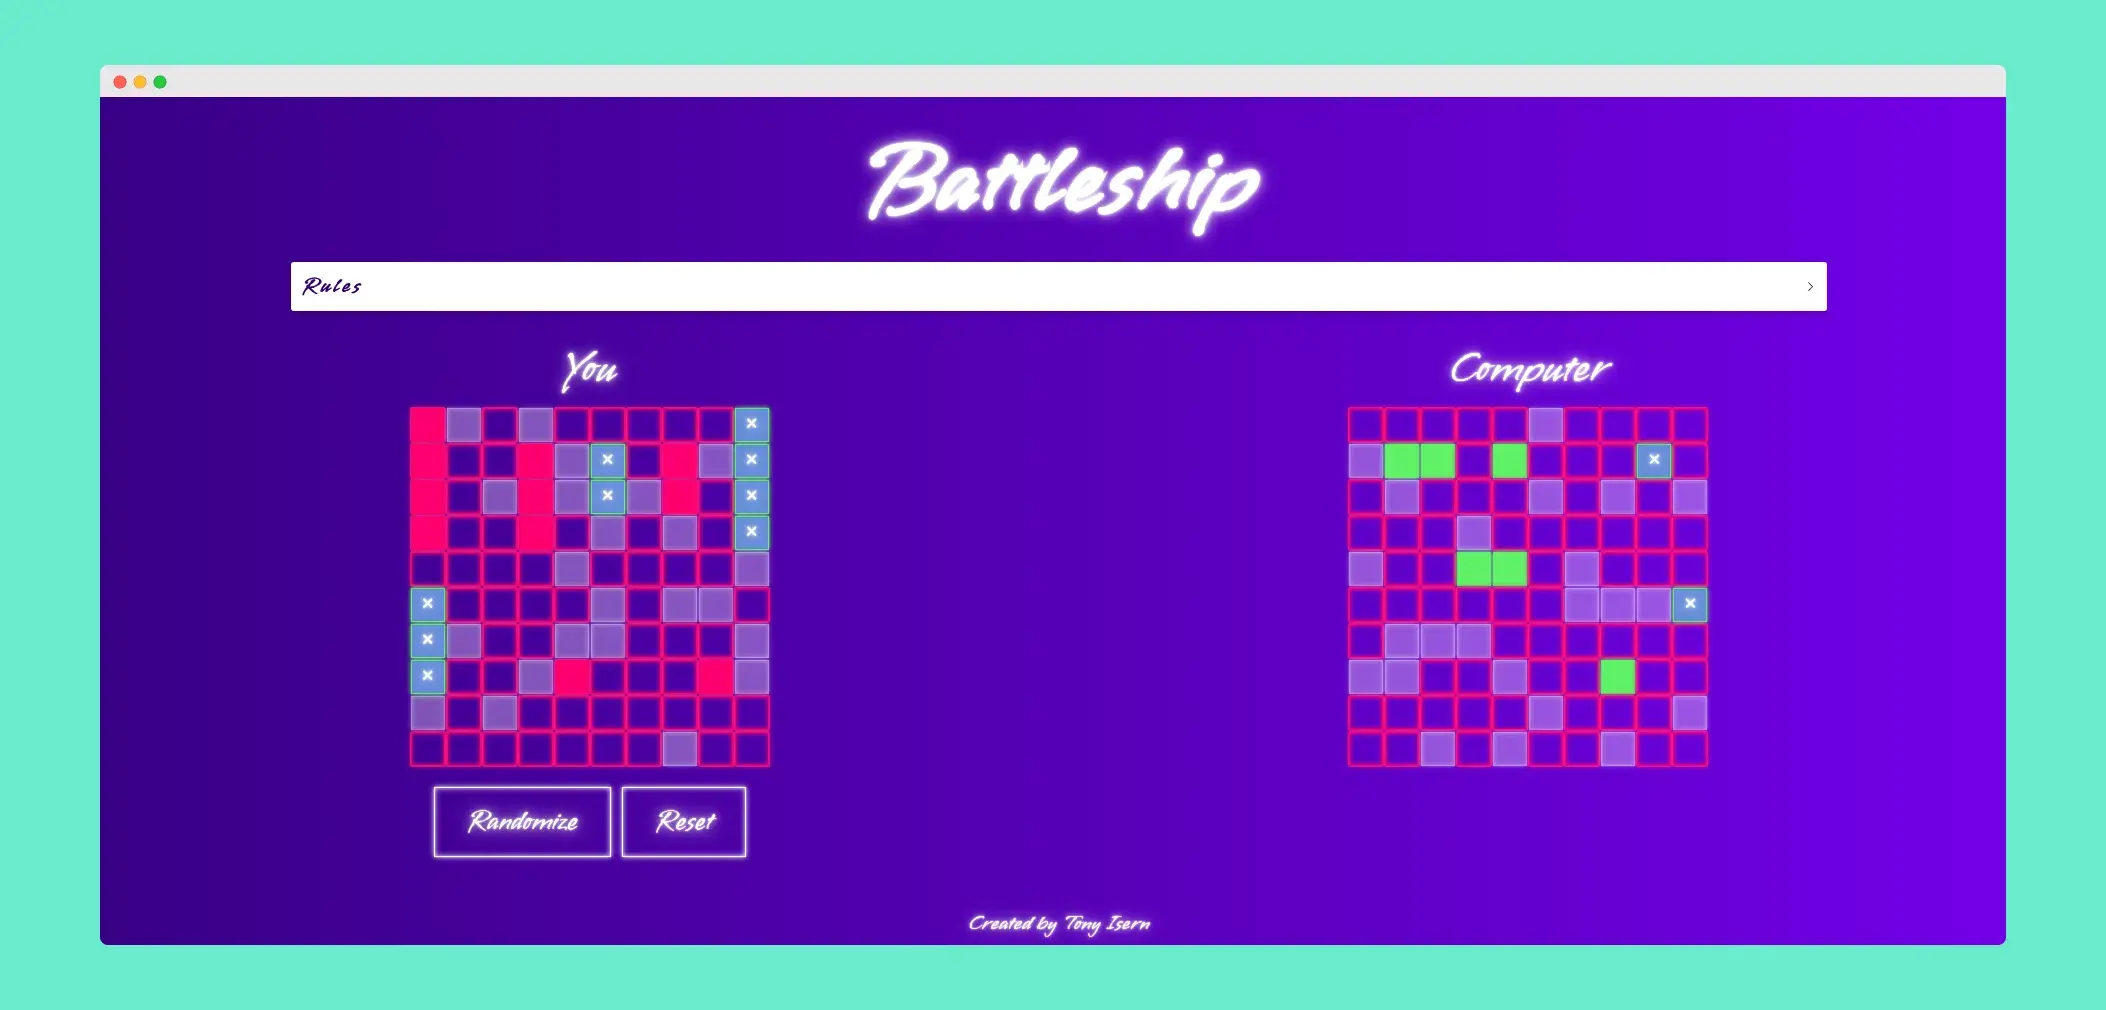 Web-based Battleship game with boards labeled 'You' and 'Computer', showing hits and misses. Two buttons below 'You' board for 'Randomize' and 'Reset'. Credit at bottom right: 'Created by Tony Isern'.